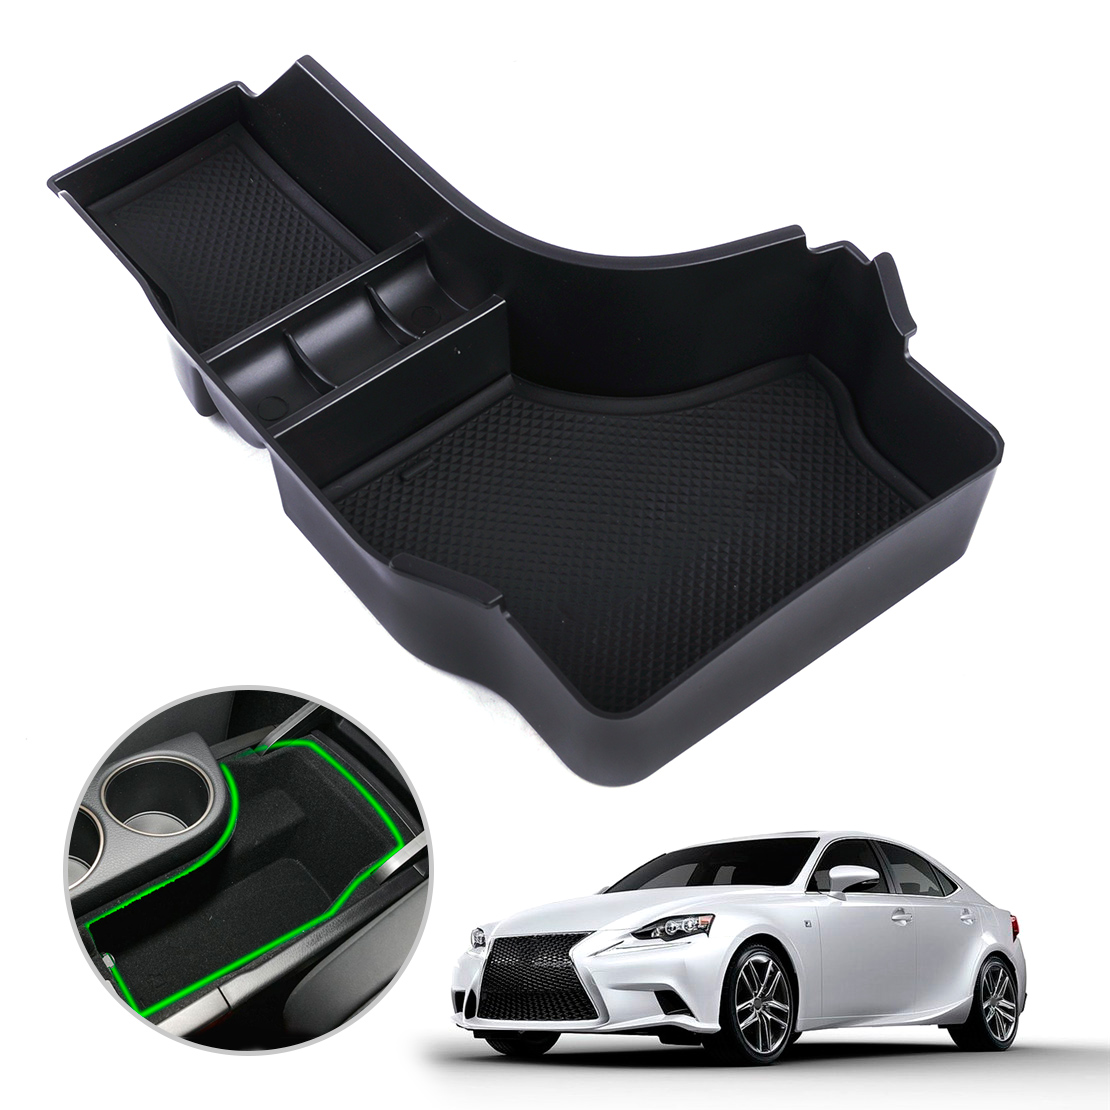 Car Center Console Armrest Storage Tray For Lexus IS250//300H//350 2014-2016 LHD